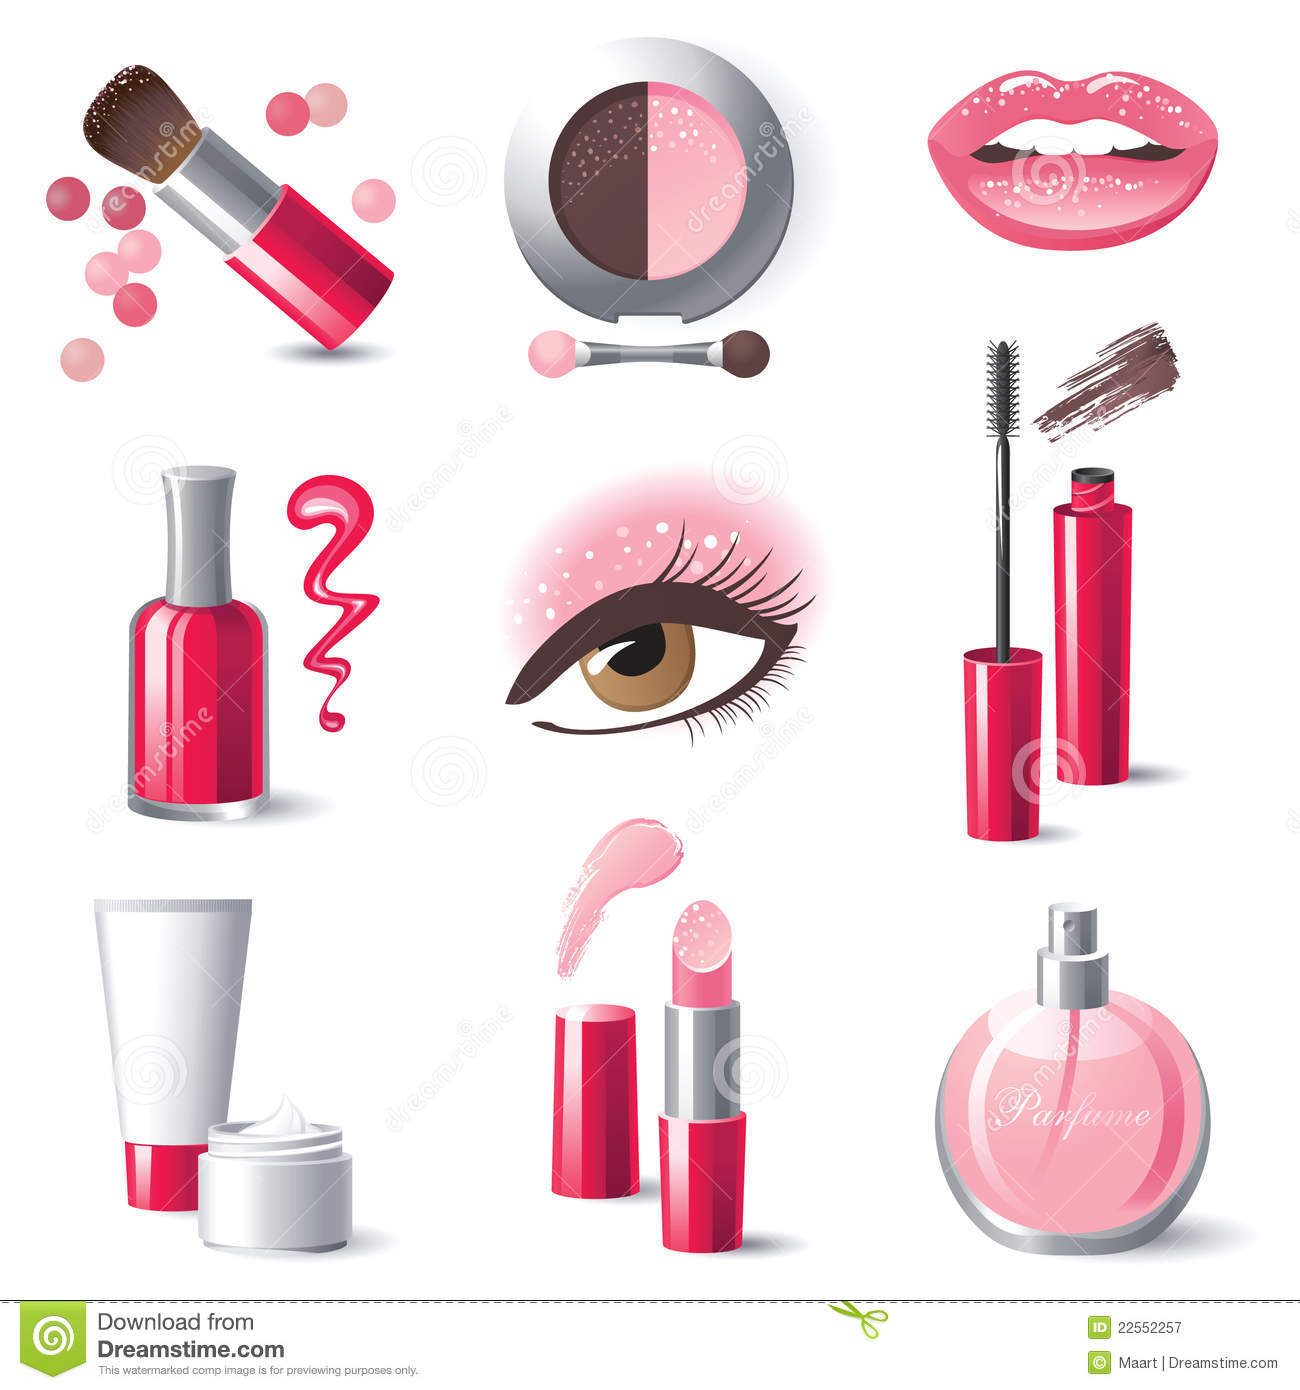 Make-up icons Royalty Free Stock Photography